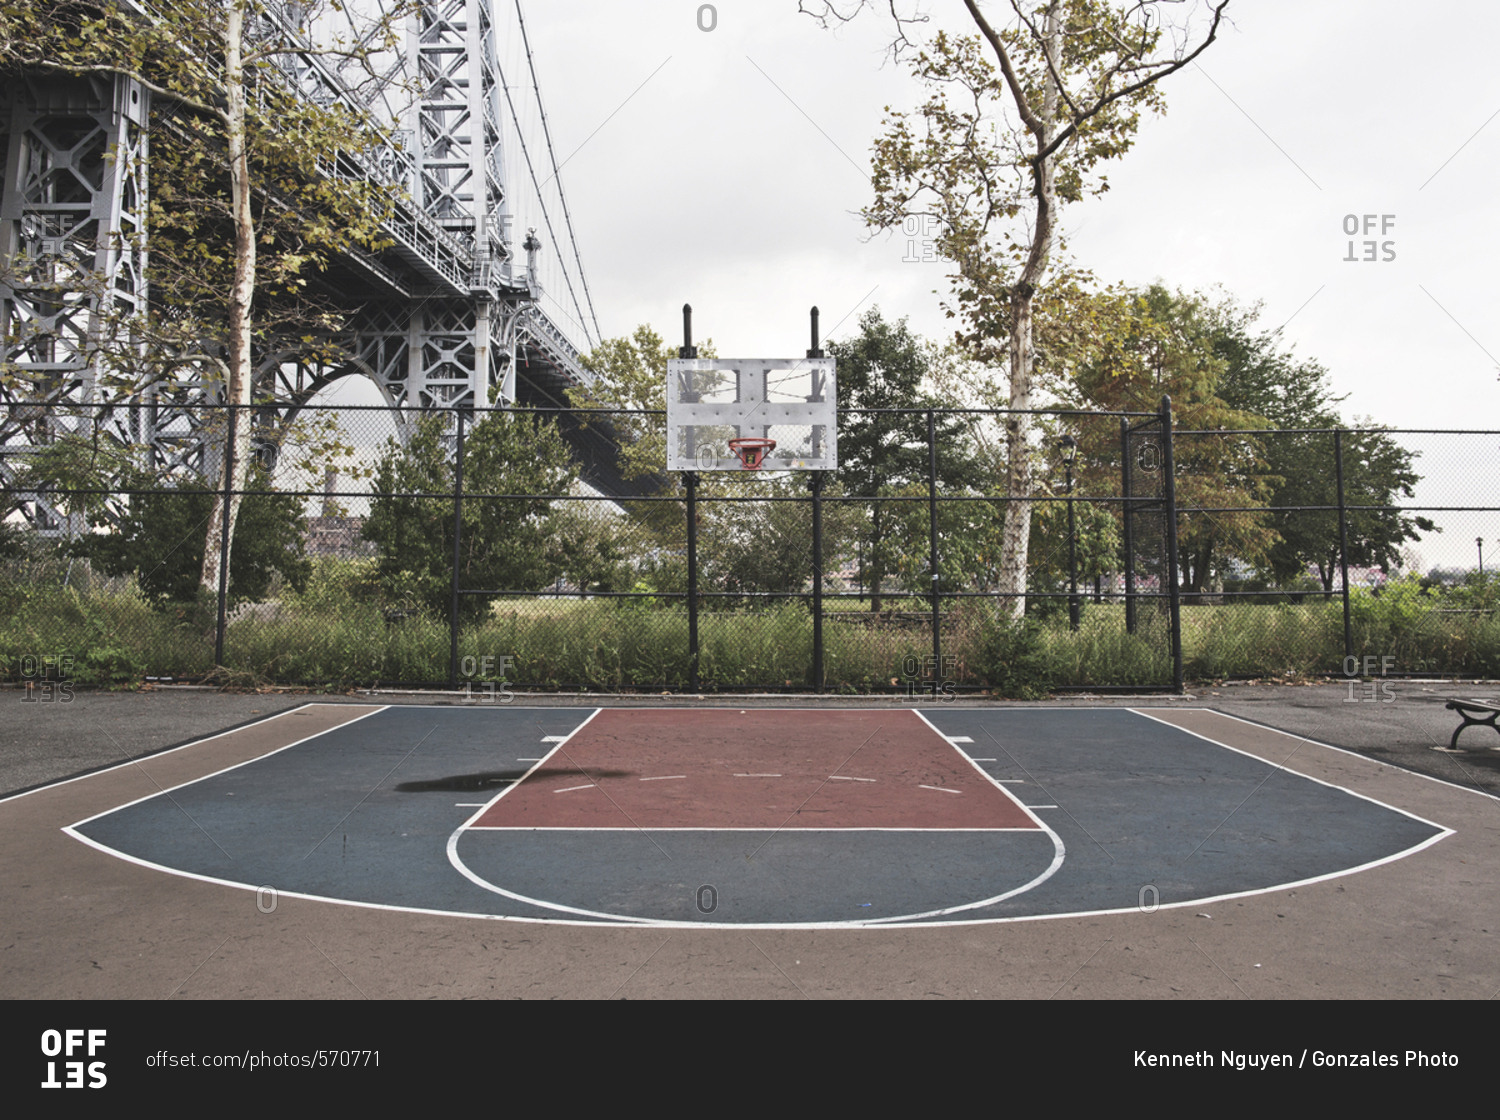 New York, United States of America - September 16, 2014. An empty basketball court in New York City.